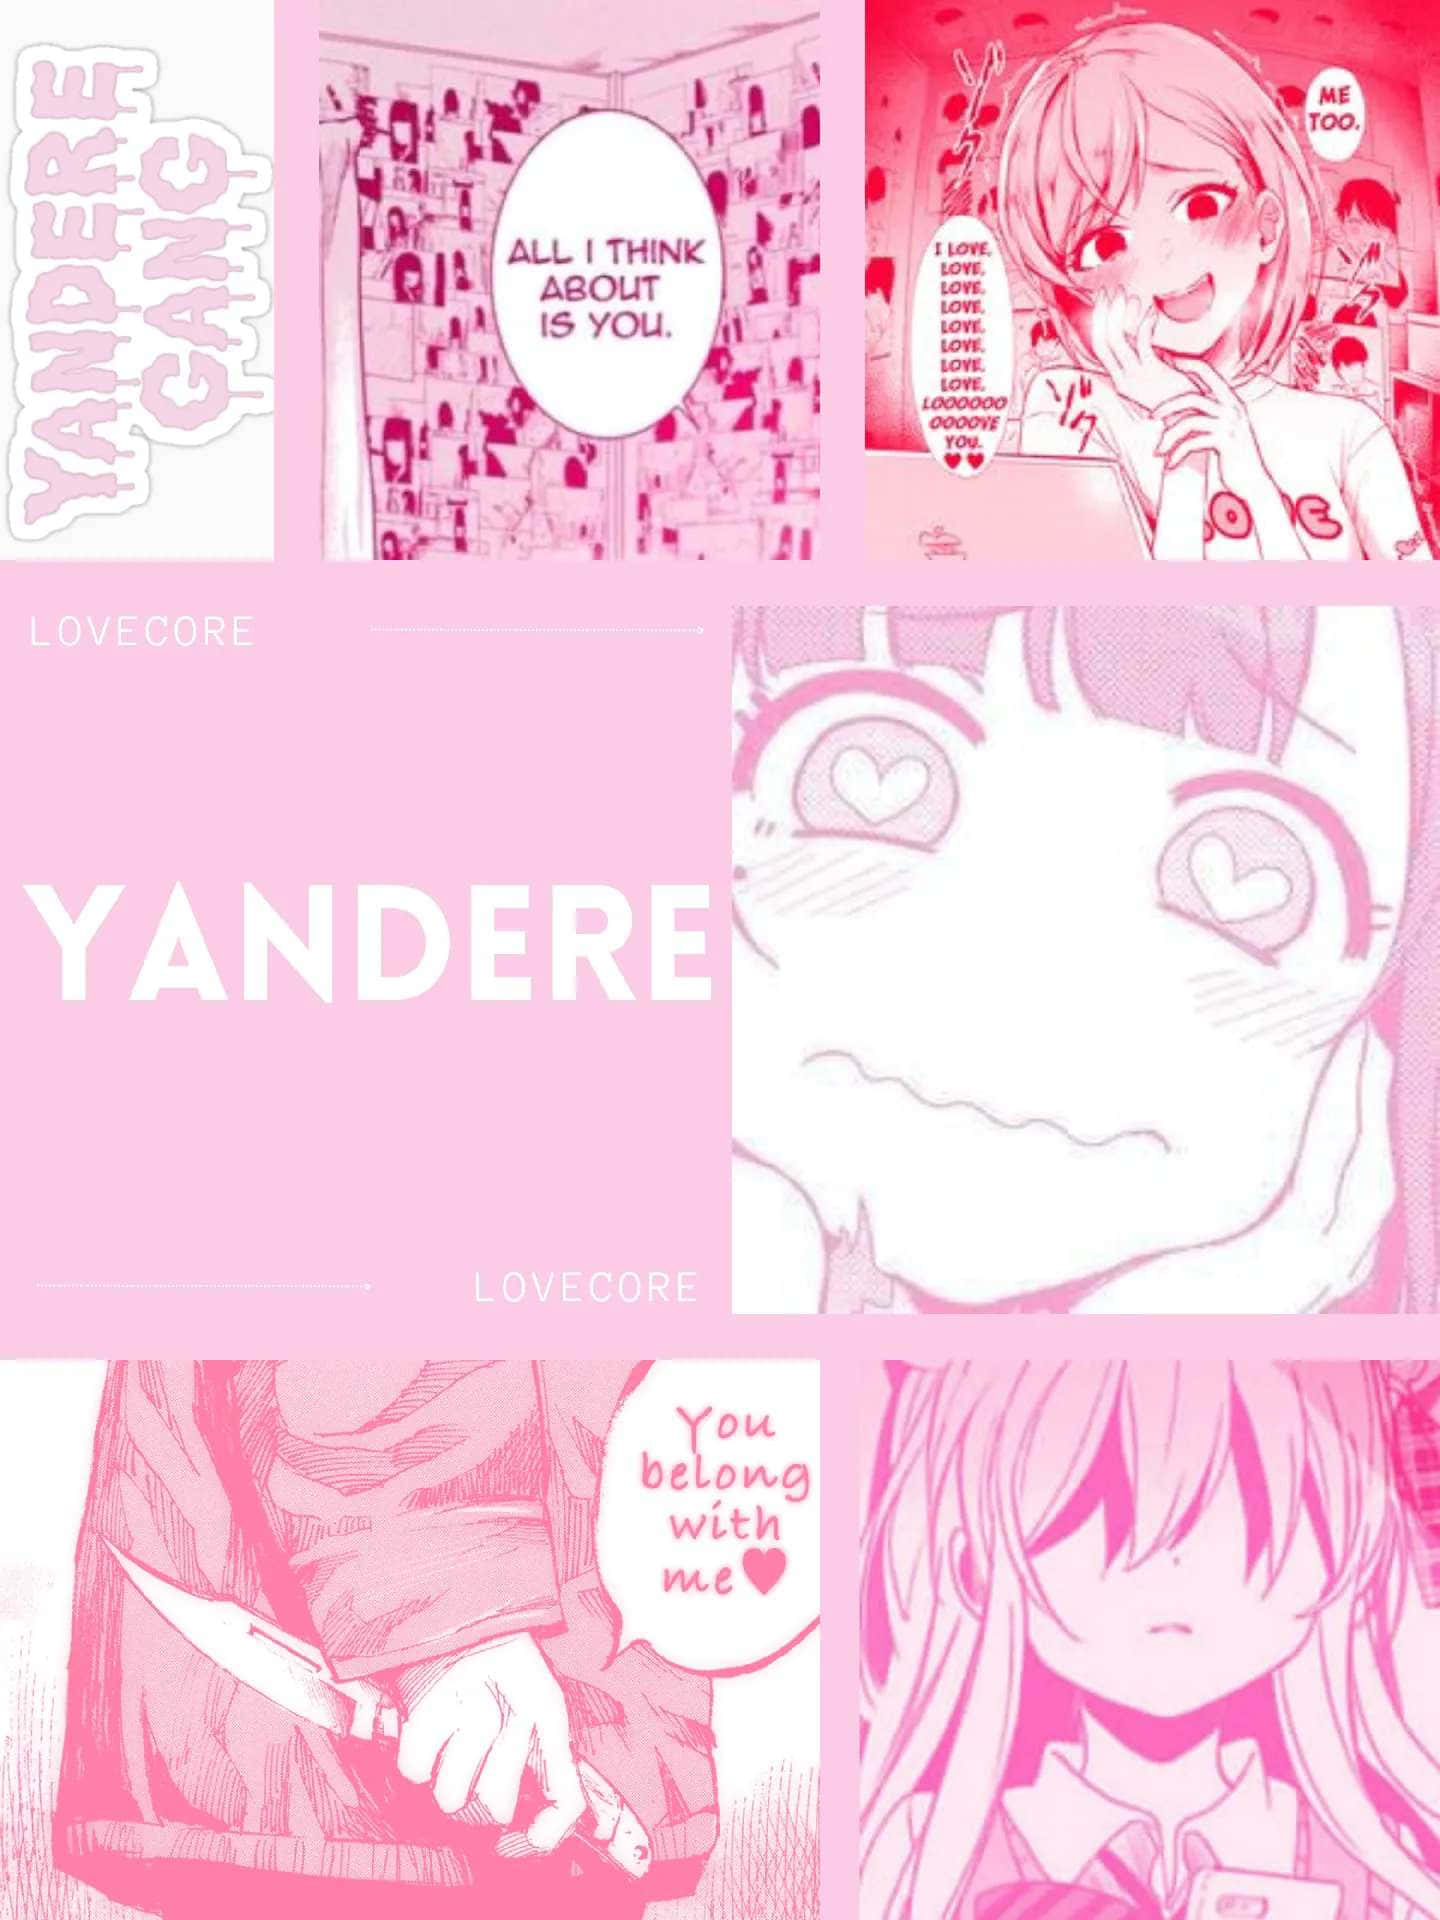 Lovecore Yandere Collage Pink Aesthetic.jpg